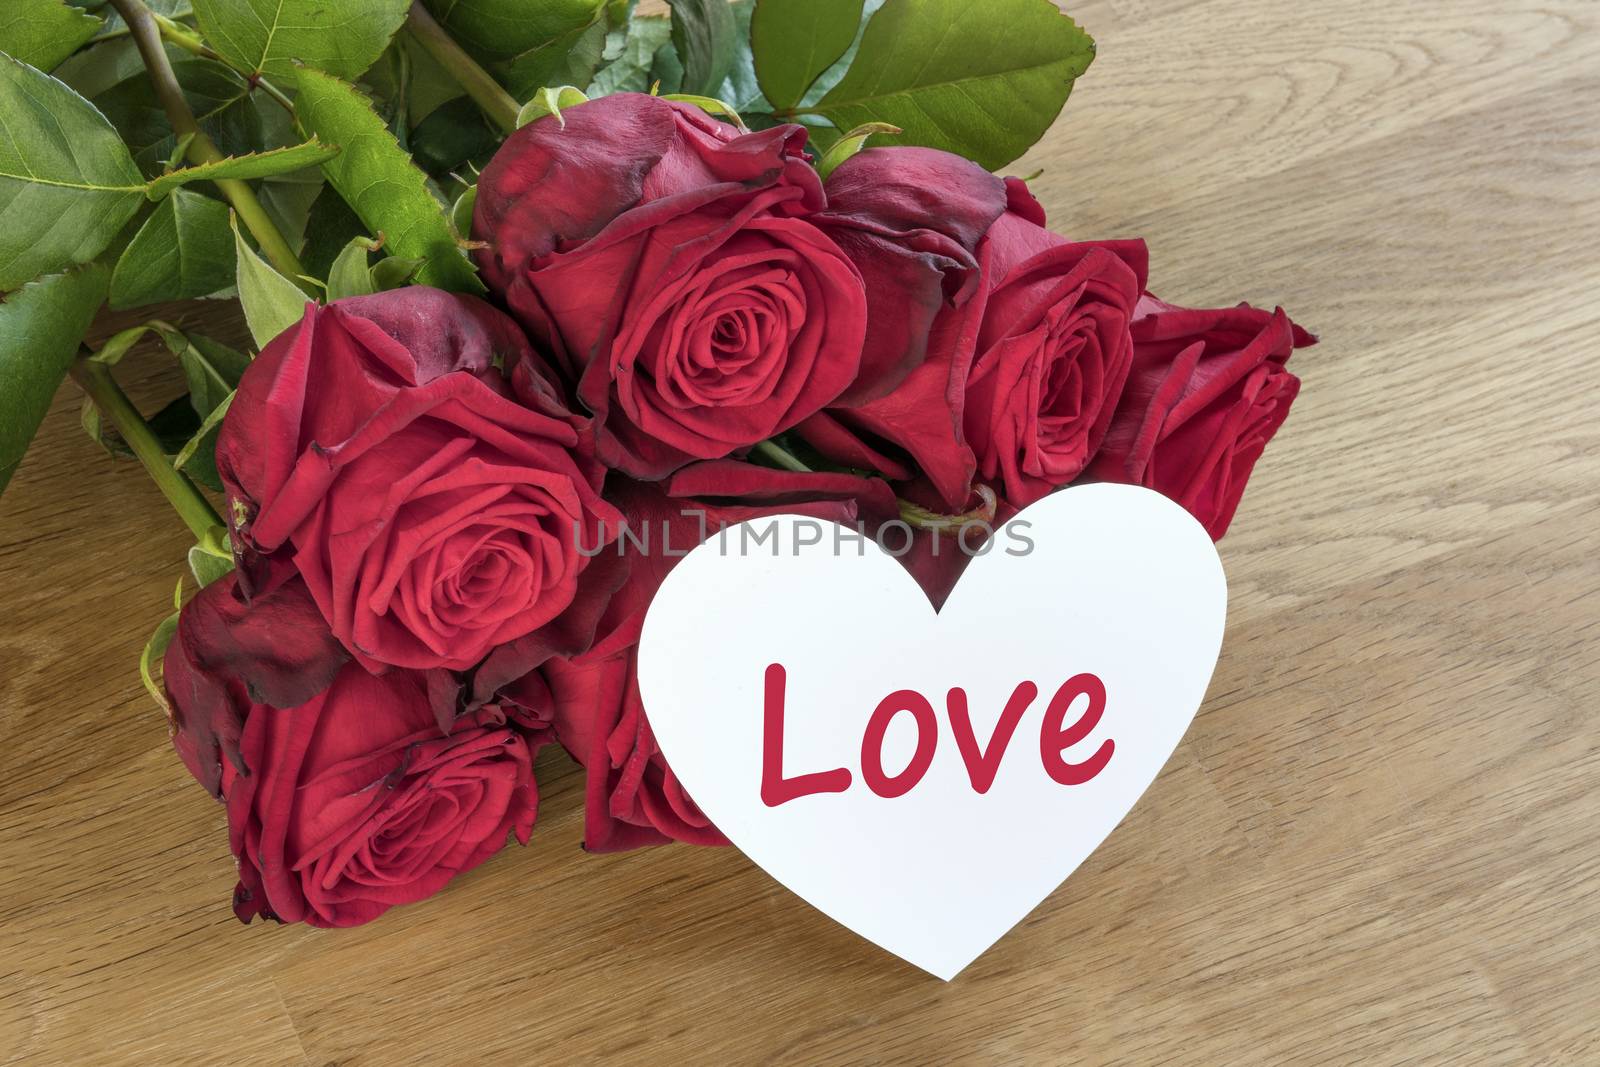 Red roses on a wooden table with white Love heart